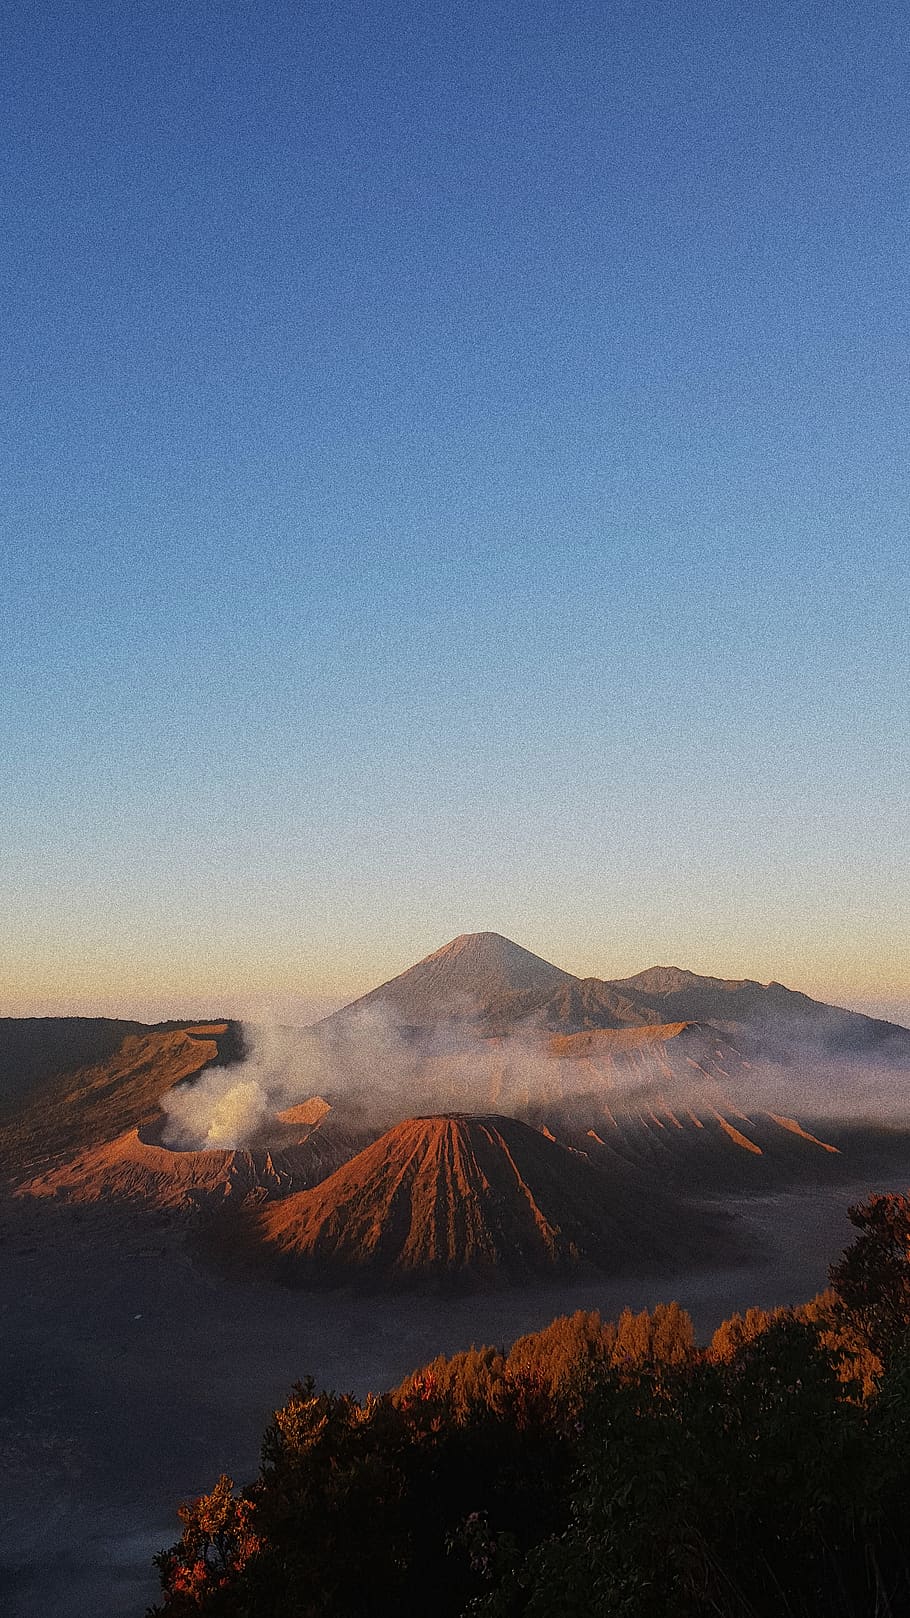 indonesia, mount bromo, sky, scenics - nature, beauty in nature